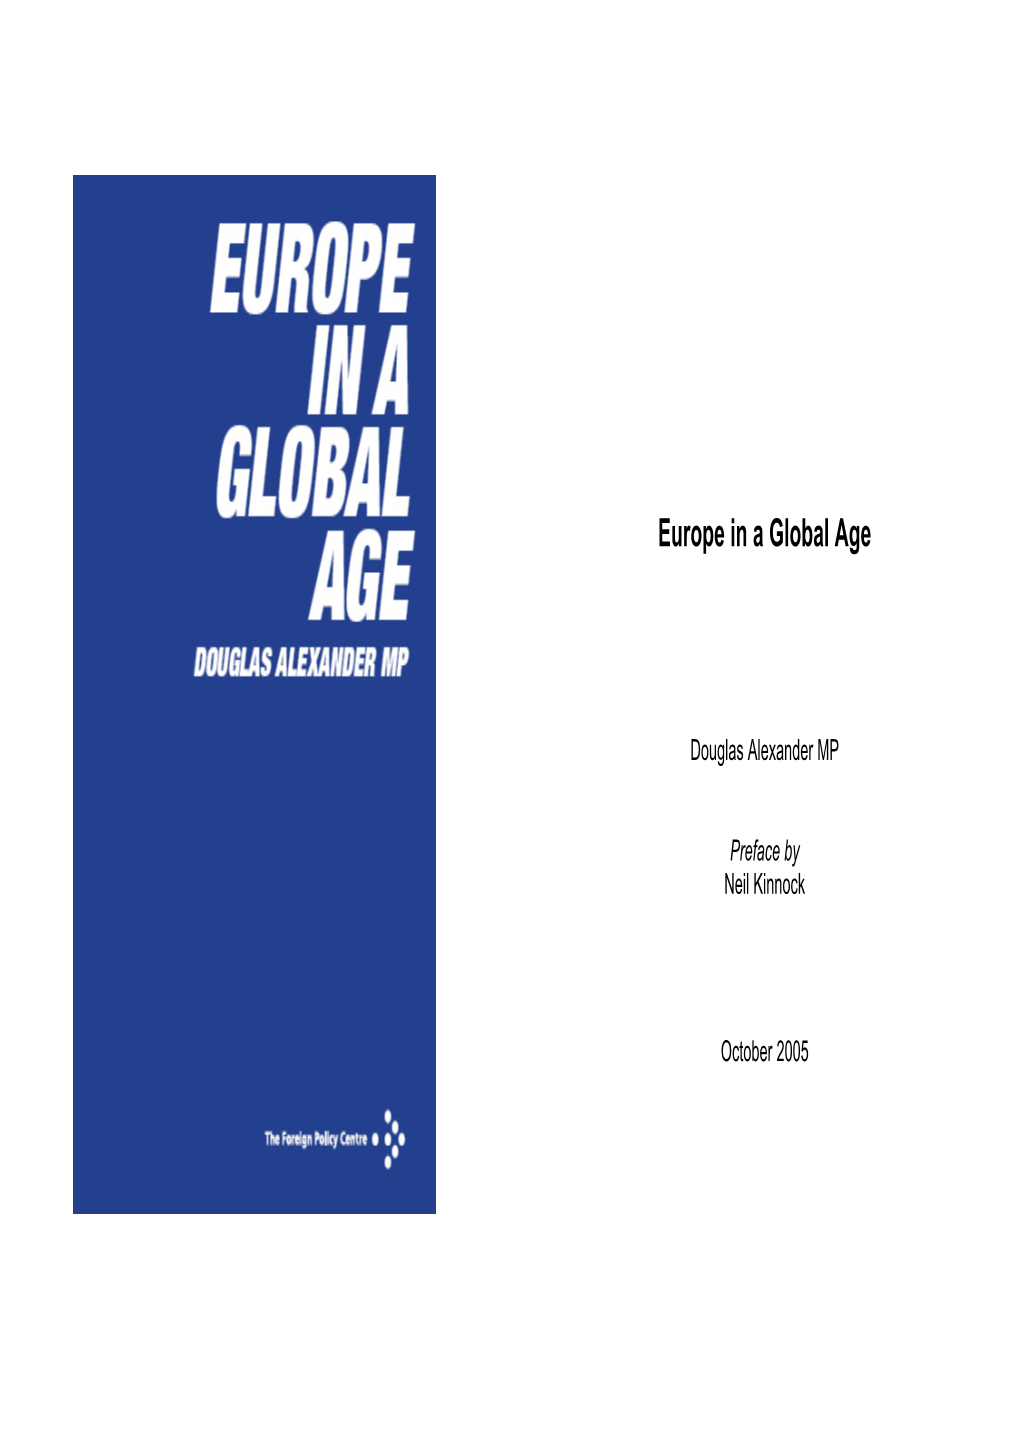 Europe in a Global Age